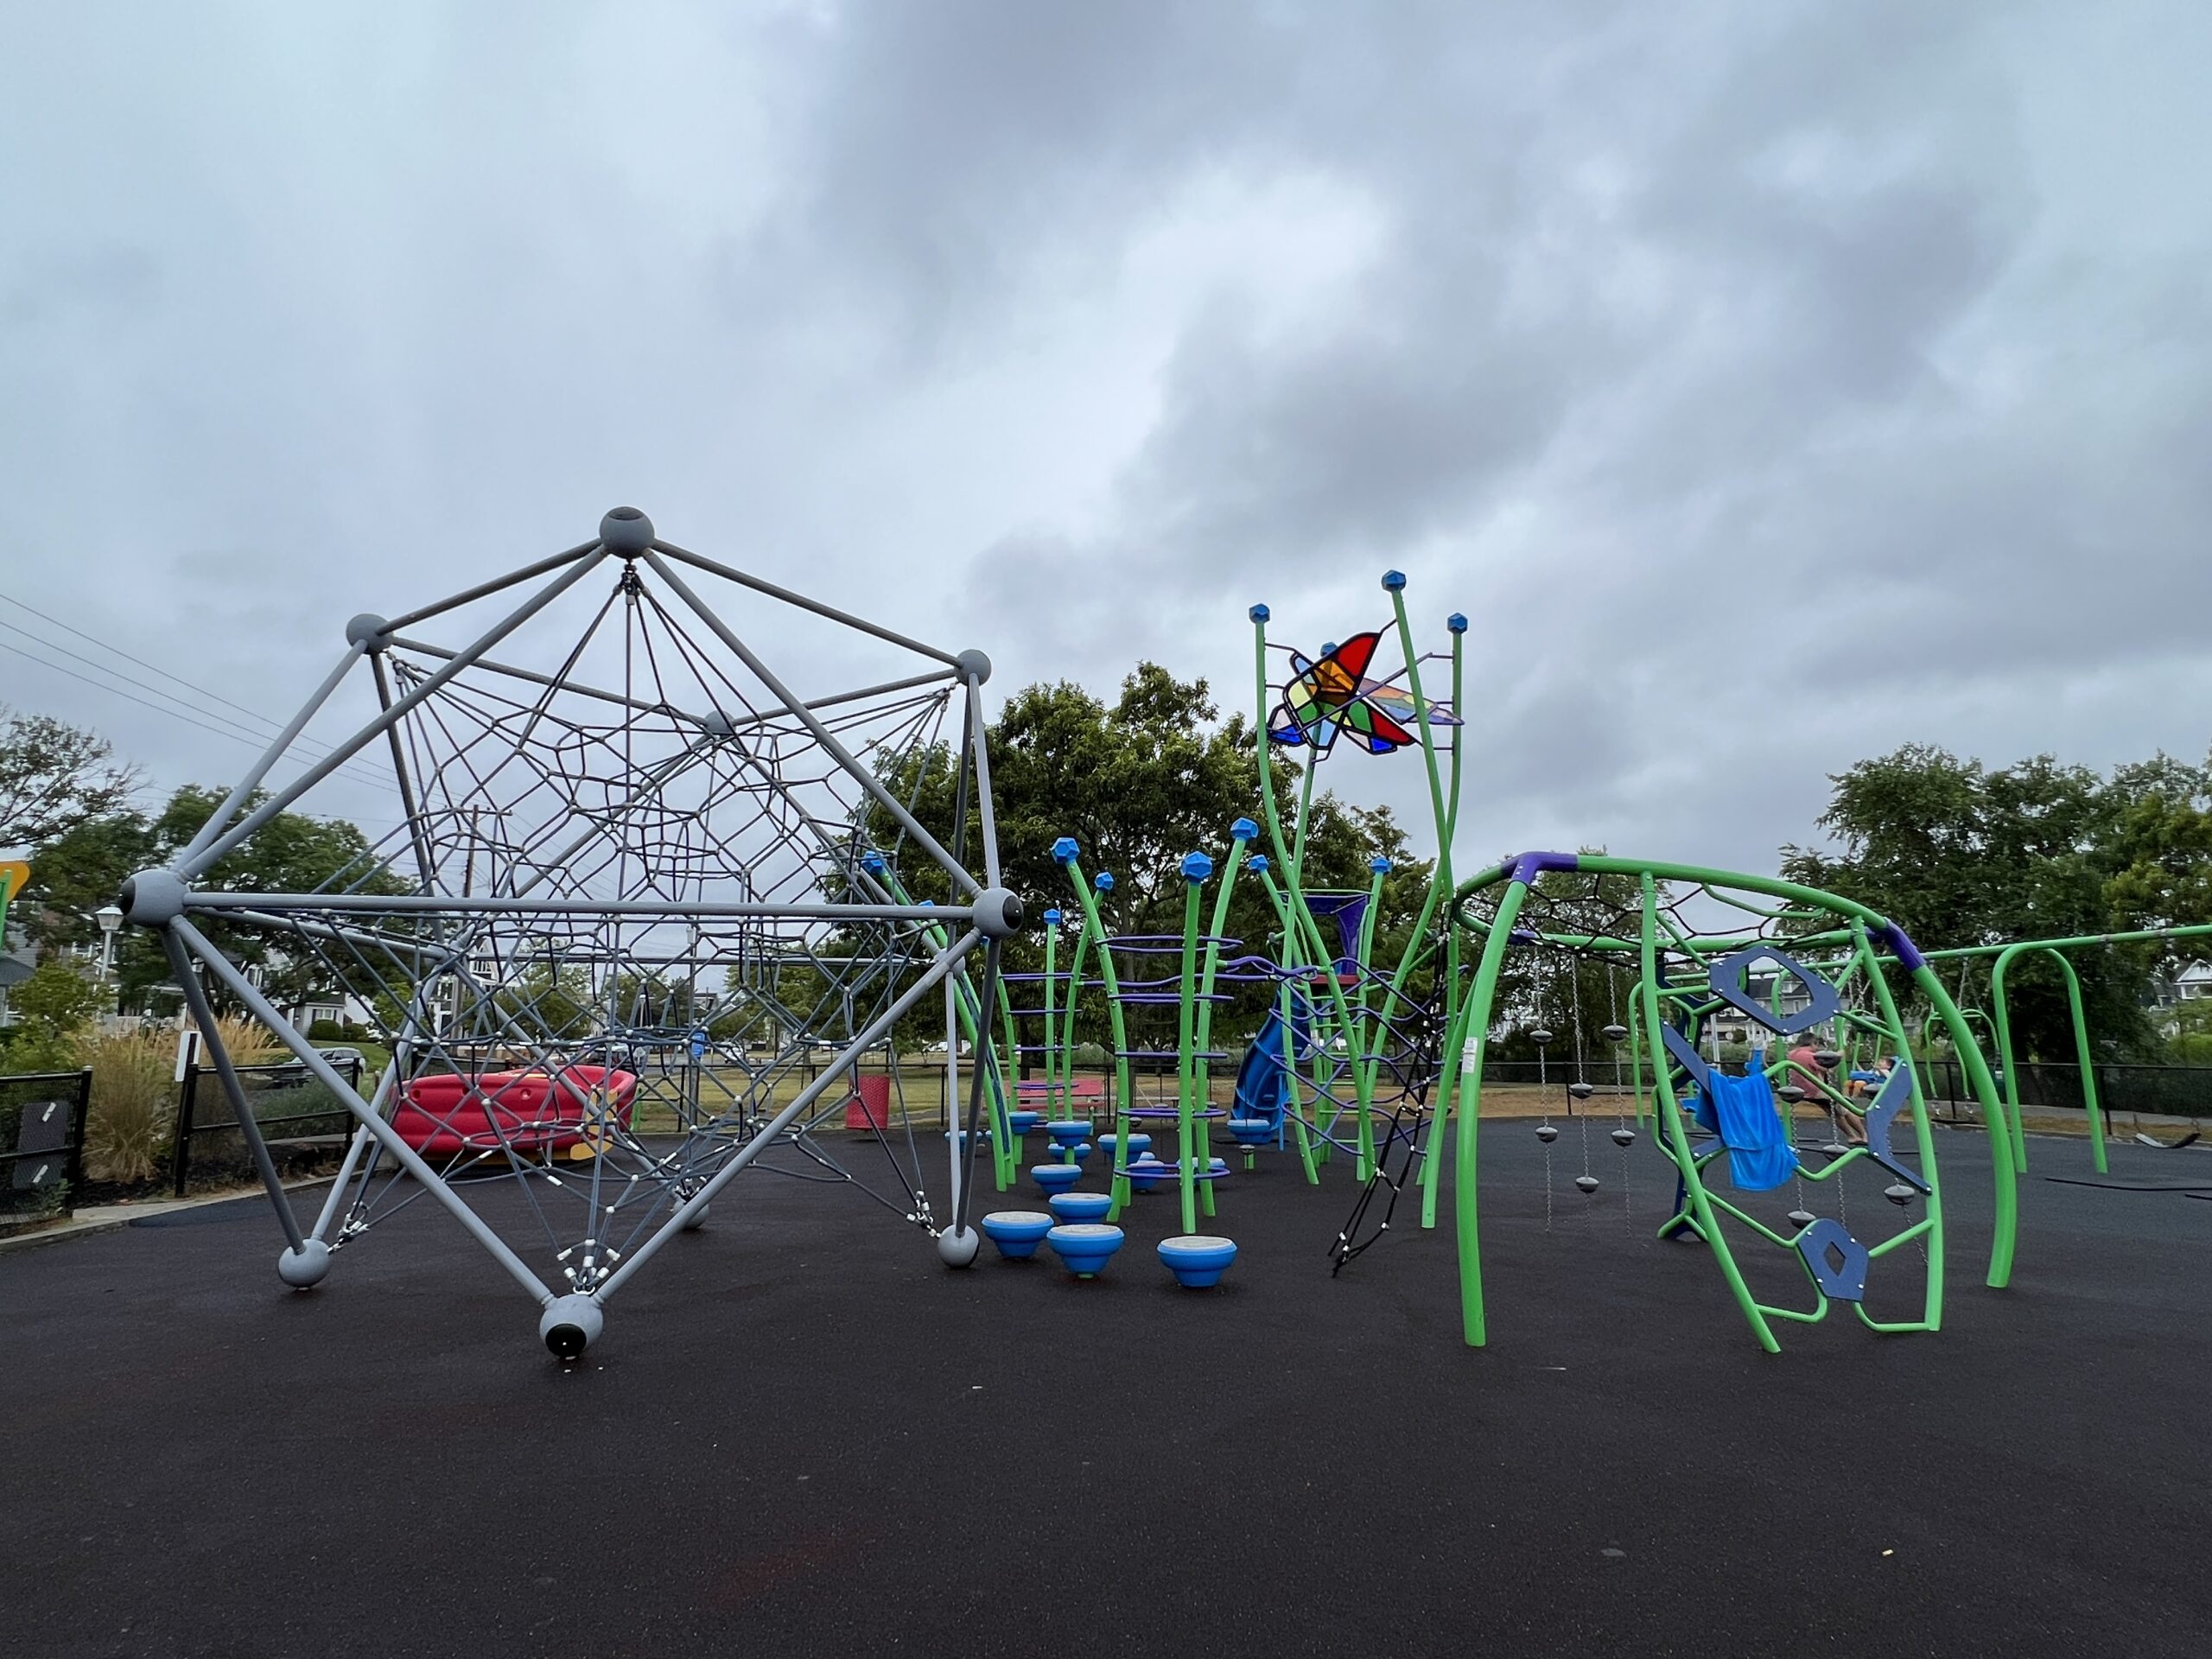 WIDE image - climbing spider web with other climbing structures at Jane Magovern's Playground in Belmar NJ